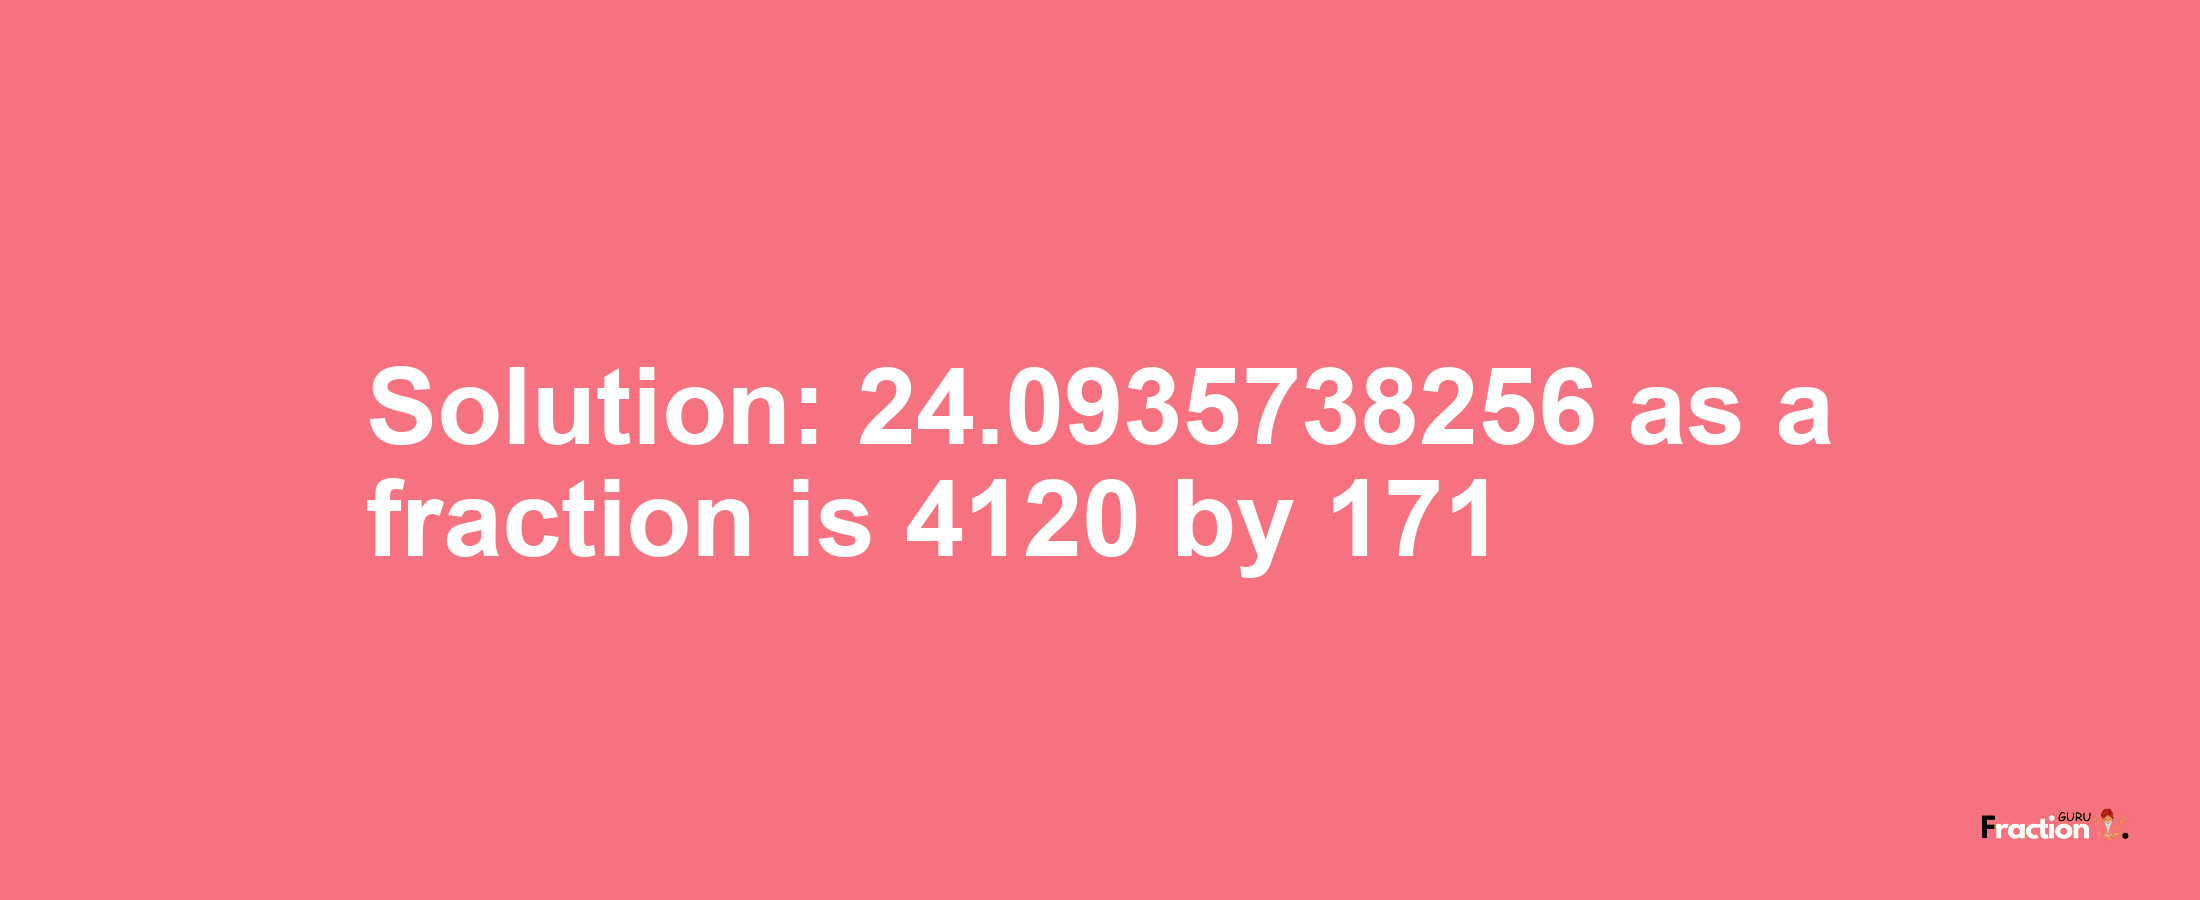 Solution:24.0935738256 as a fraction is 4120/171